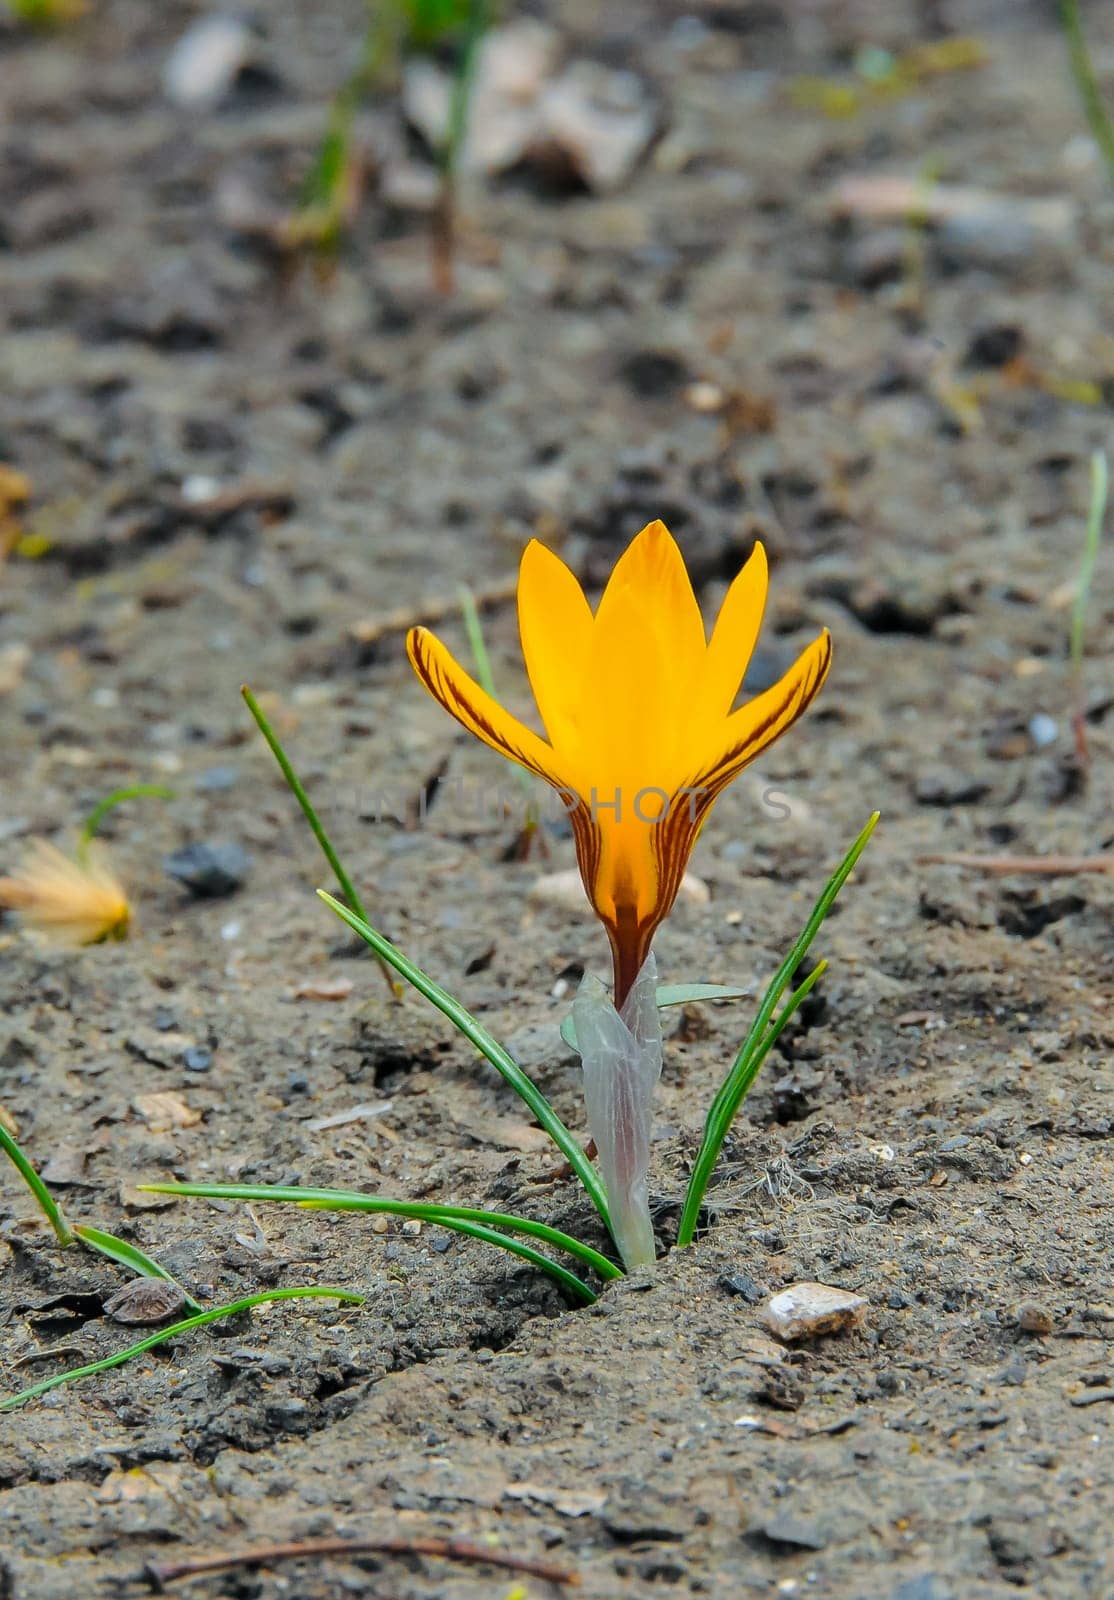 Yellow crocus Dorothy - first spring flower blooms in the garden by Hydrobiolog